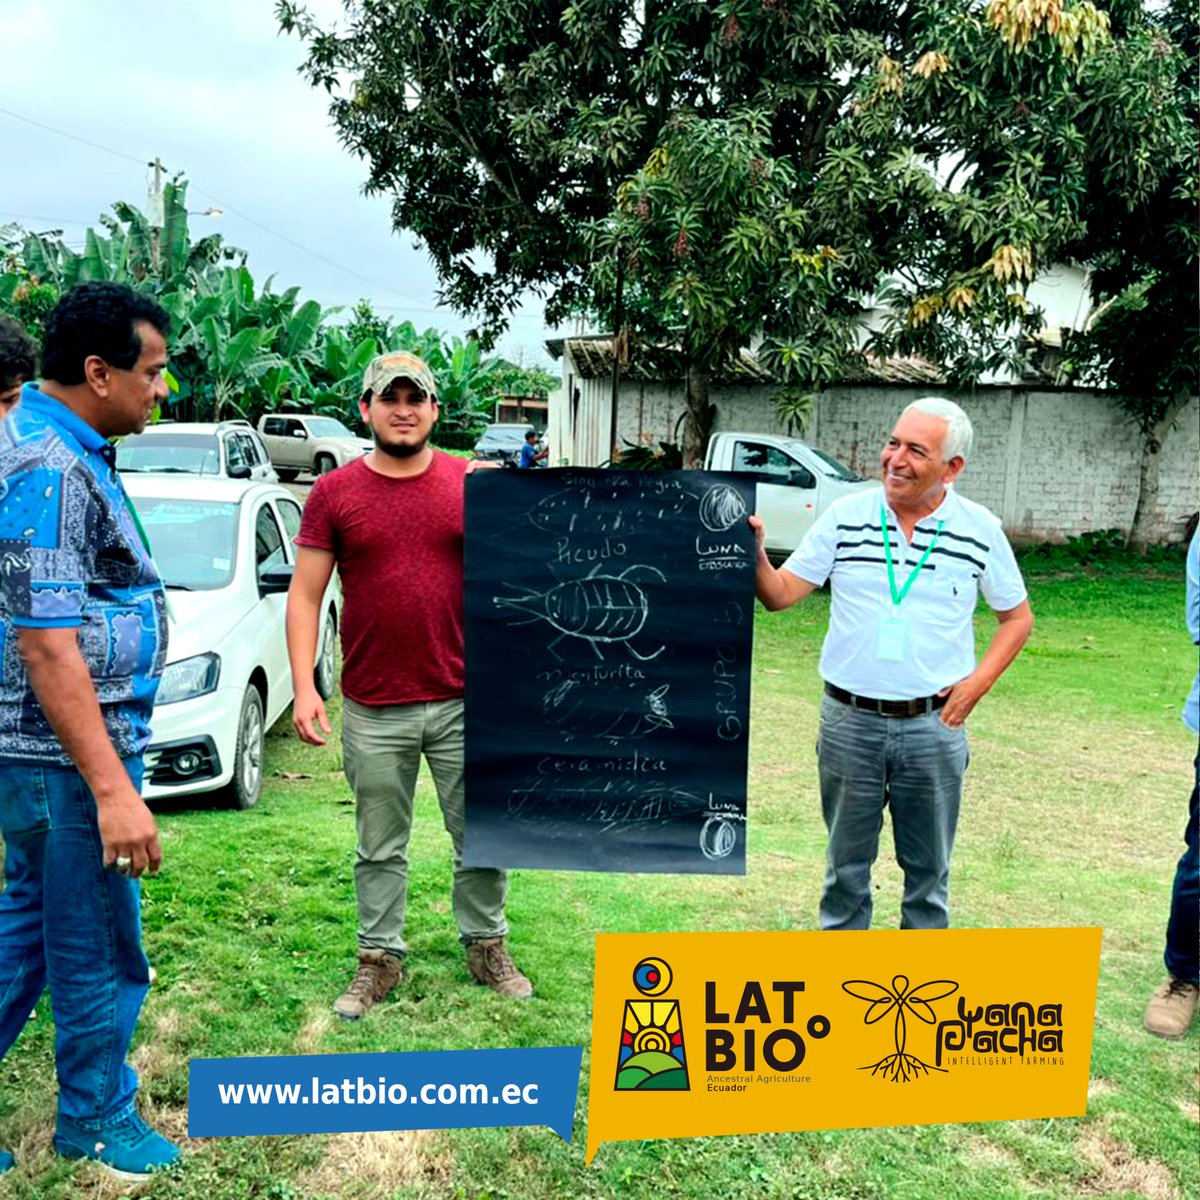 Lat Bio, Yanapacha together with Demeter International and the Biodynamic Association of Ecuador organized the first international training to introduce biodynamic agriculture on October 20, 21 and 22. #latbio #biodynamicagriculture #regenerative